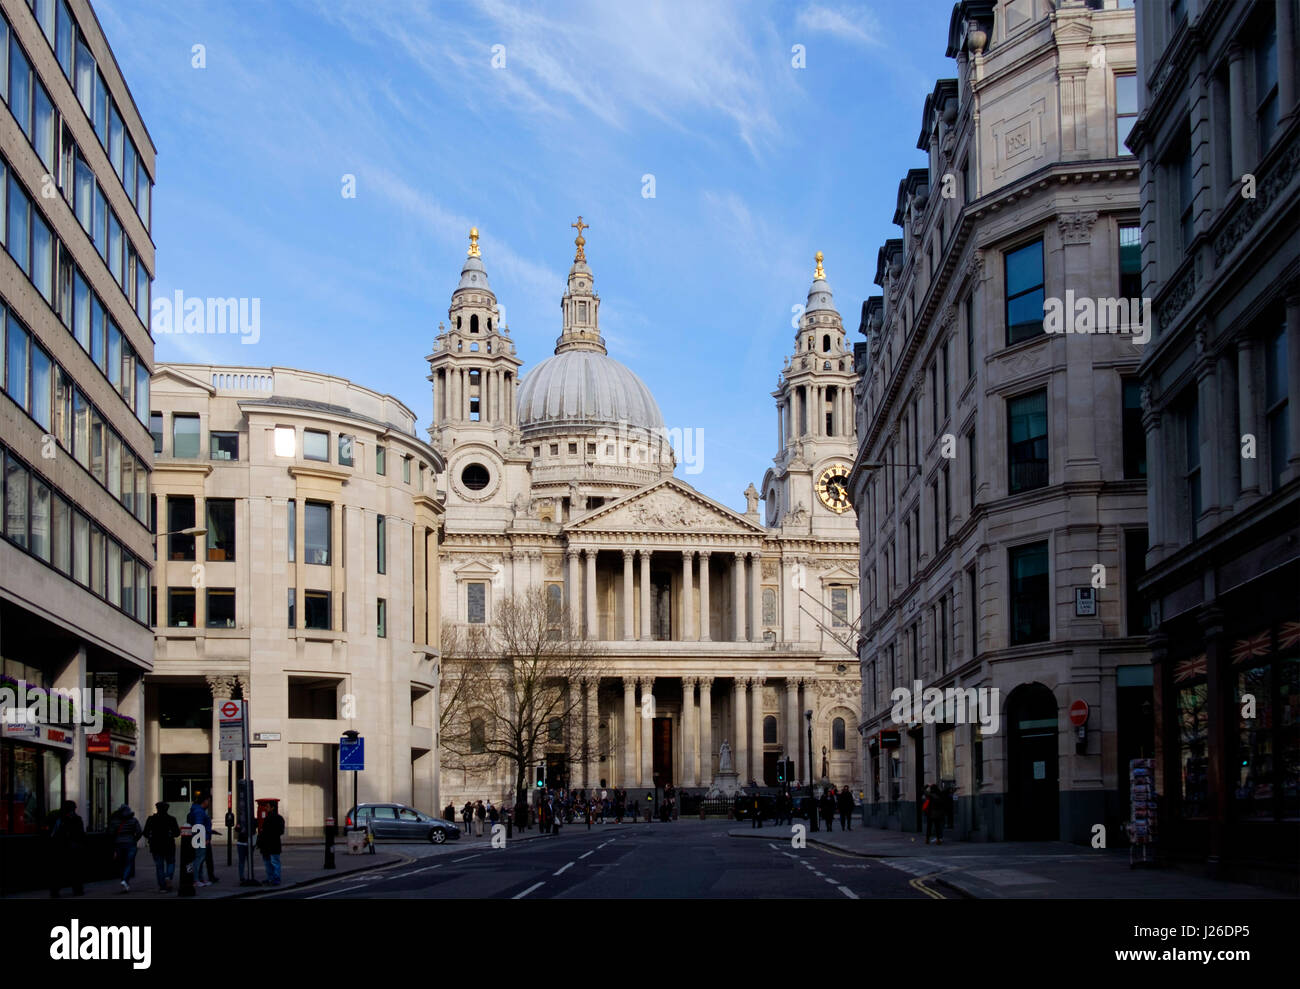 St. Paul's Cathedral in London, England, UK, Europe Stock Photo